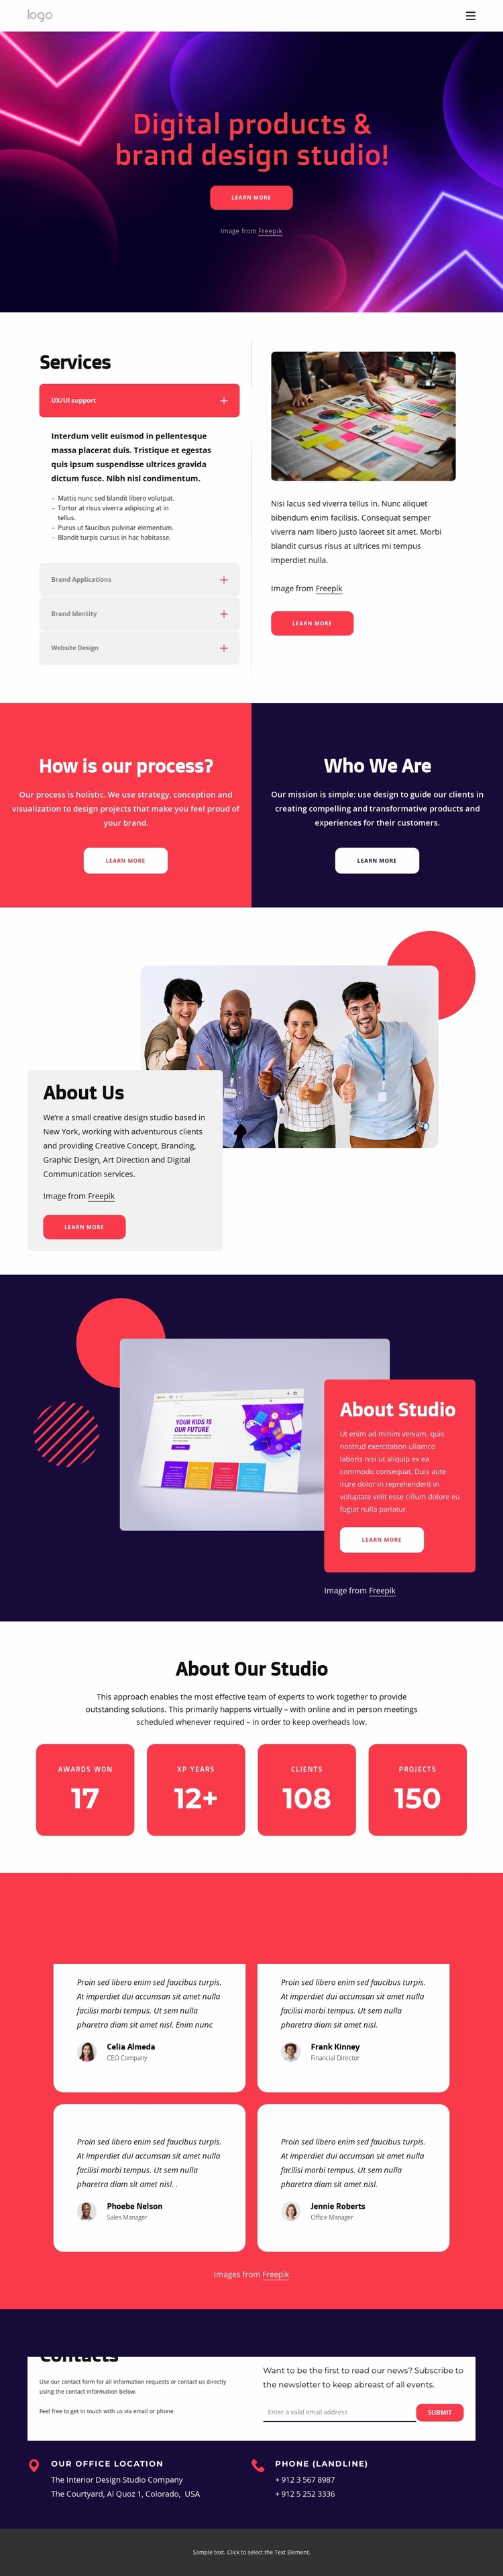 Digital products and brand design studio eCommerce Template